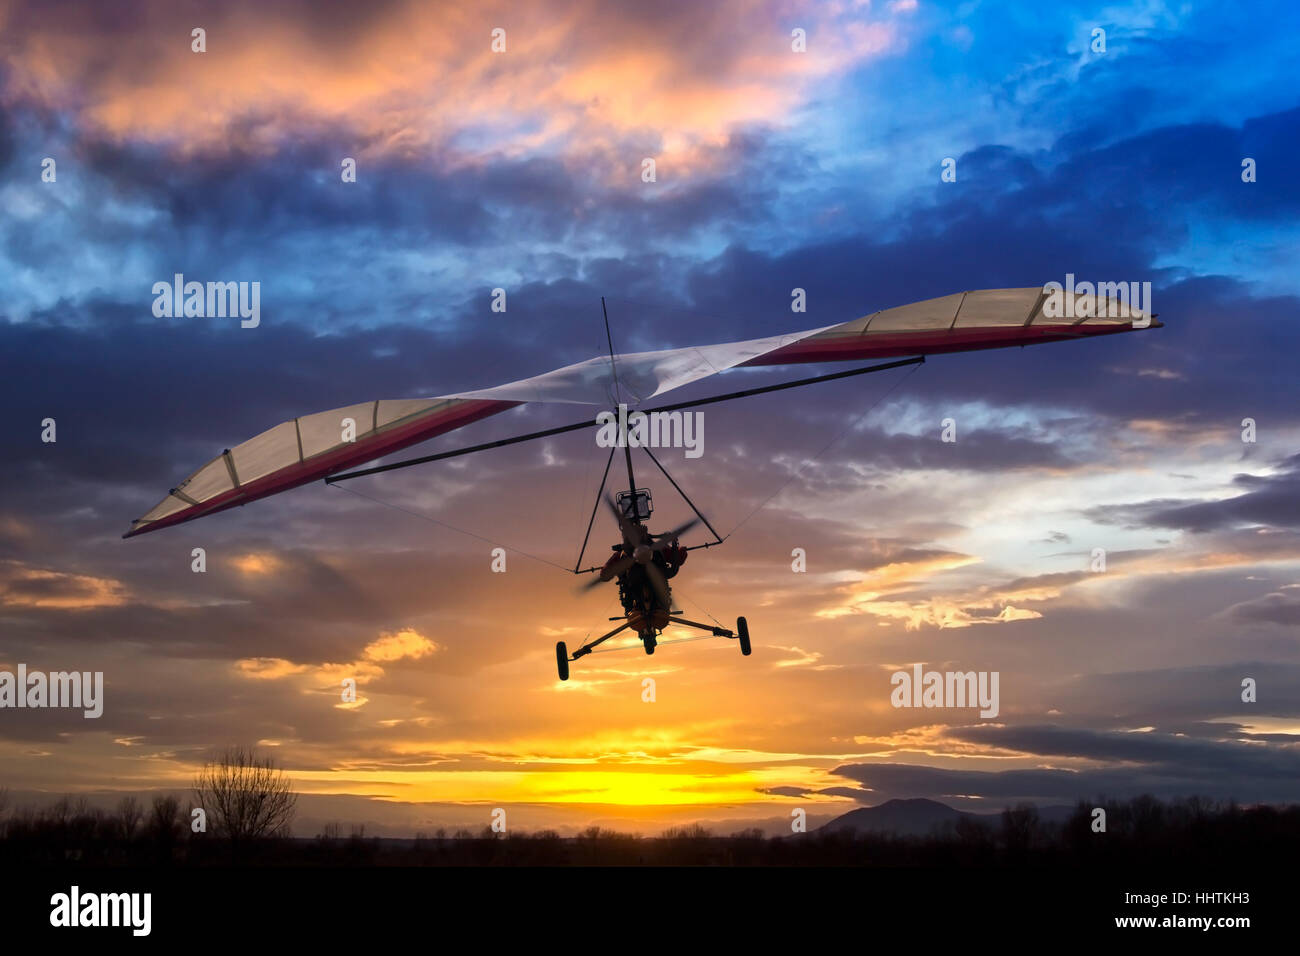 Motorized hang glider flying in the sunset Stock Photo